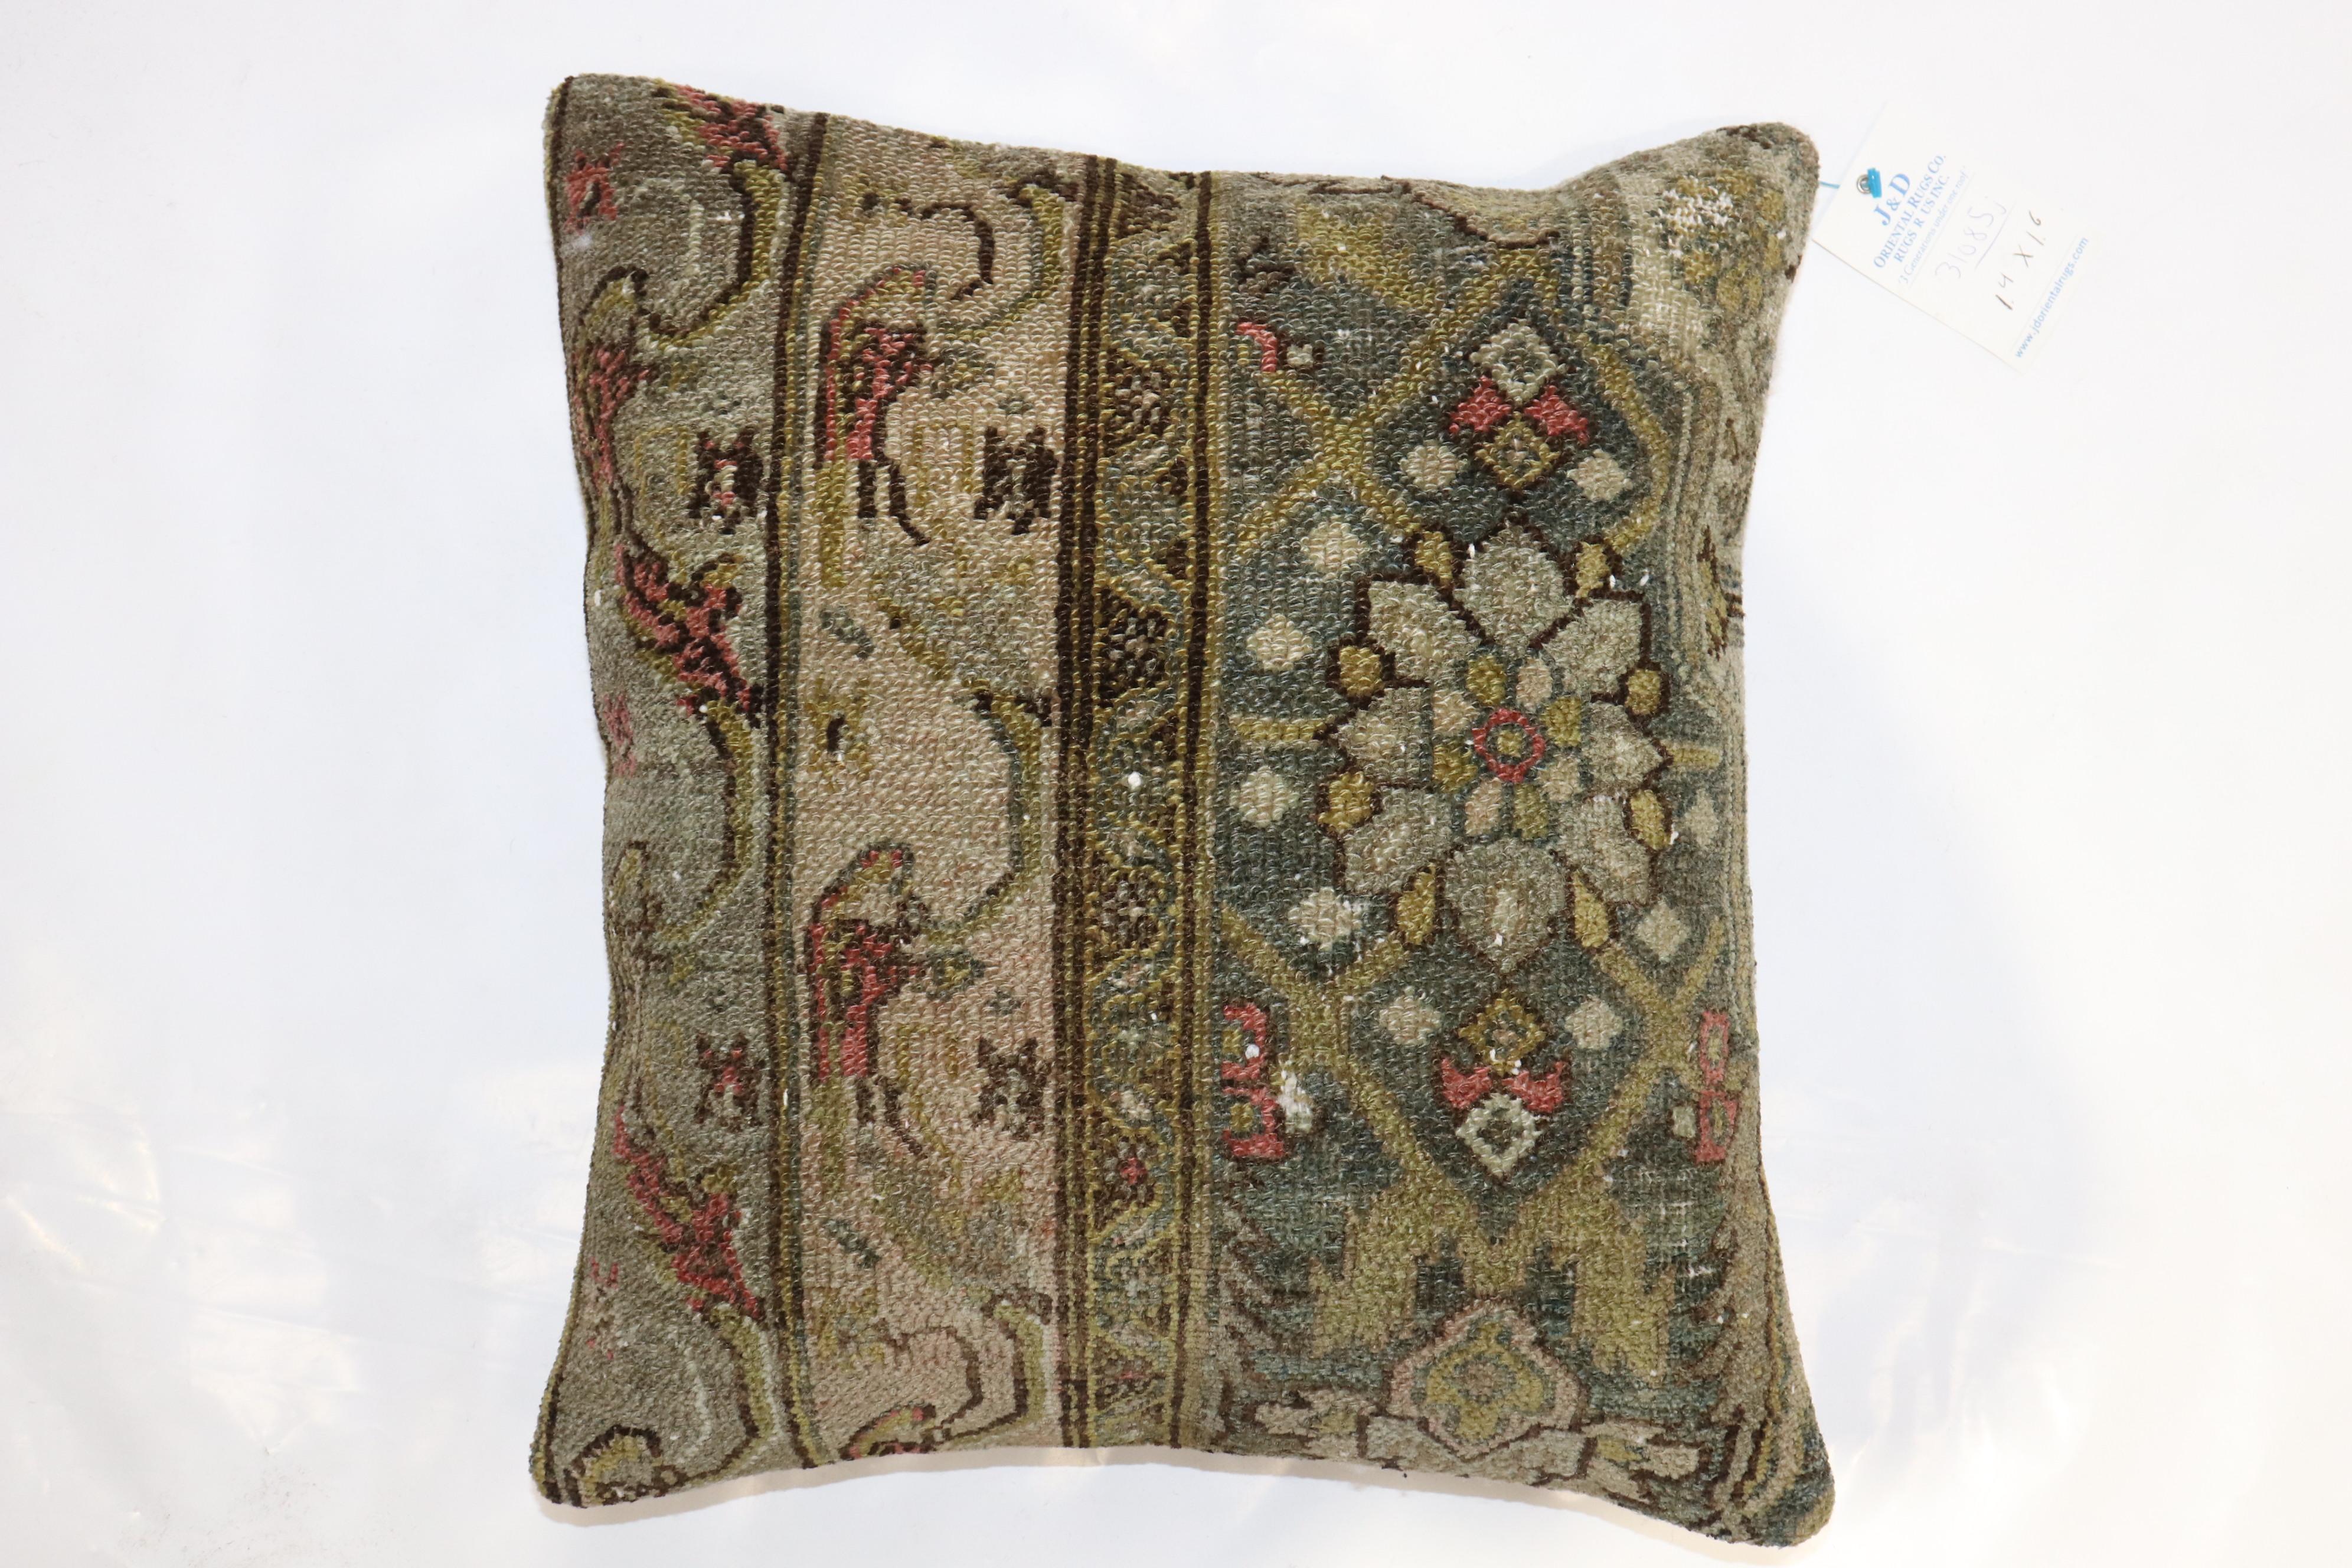 Pillow made from an antique Persian Bibikabad rug.

16'' x 18''